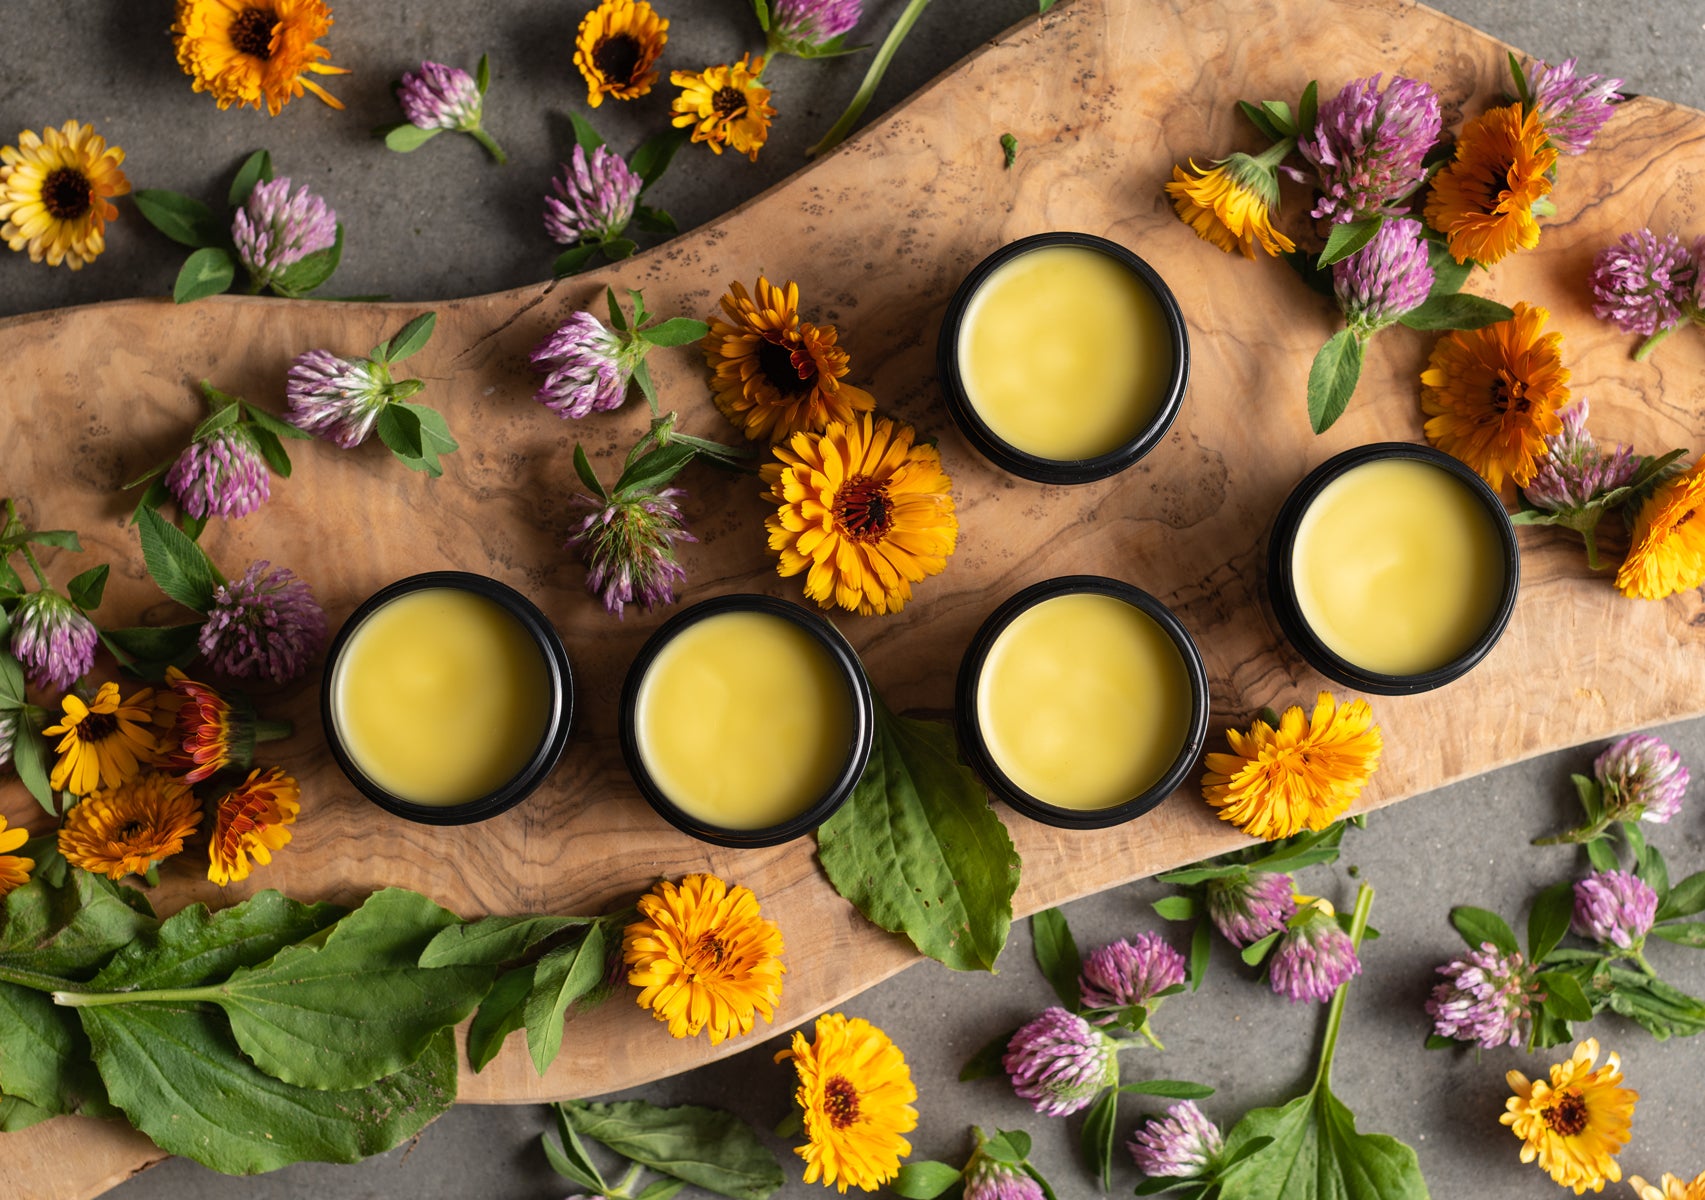 Image of herbal salves on rustic wooden board with calendula, comfrey and red clover strewn about /><p><strong>Step 2: Making the salve</strong></p>
<p><em>Ingredients:</em></p>
<ul>
<li>¾ cup infused herbal oil</li>
<li>¼ cup coconut oil</li>
<li>1 oz beeswax</li>
<li>Optional: 15-18 drops essential oils of your choice – we used geranium and orange essential oils for a fresh and grounded scent.</li>
</ul>
<p><em>Directions:</em></p>
<ol>
<li>Add water to the bottom pot of your double boiler, and then pour your infused oil into the top pot and place above. You can also create a <a href=